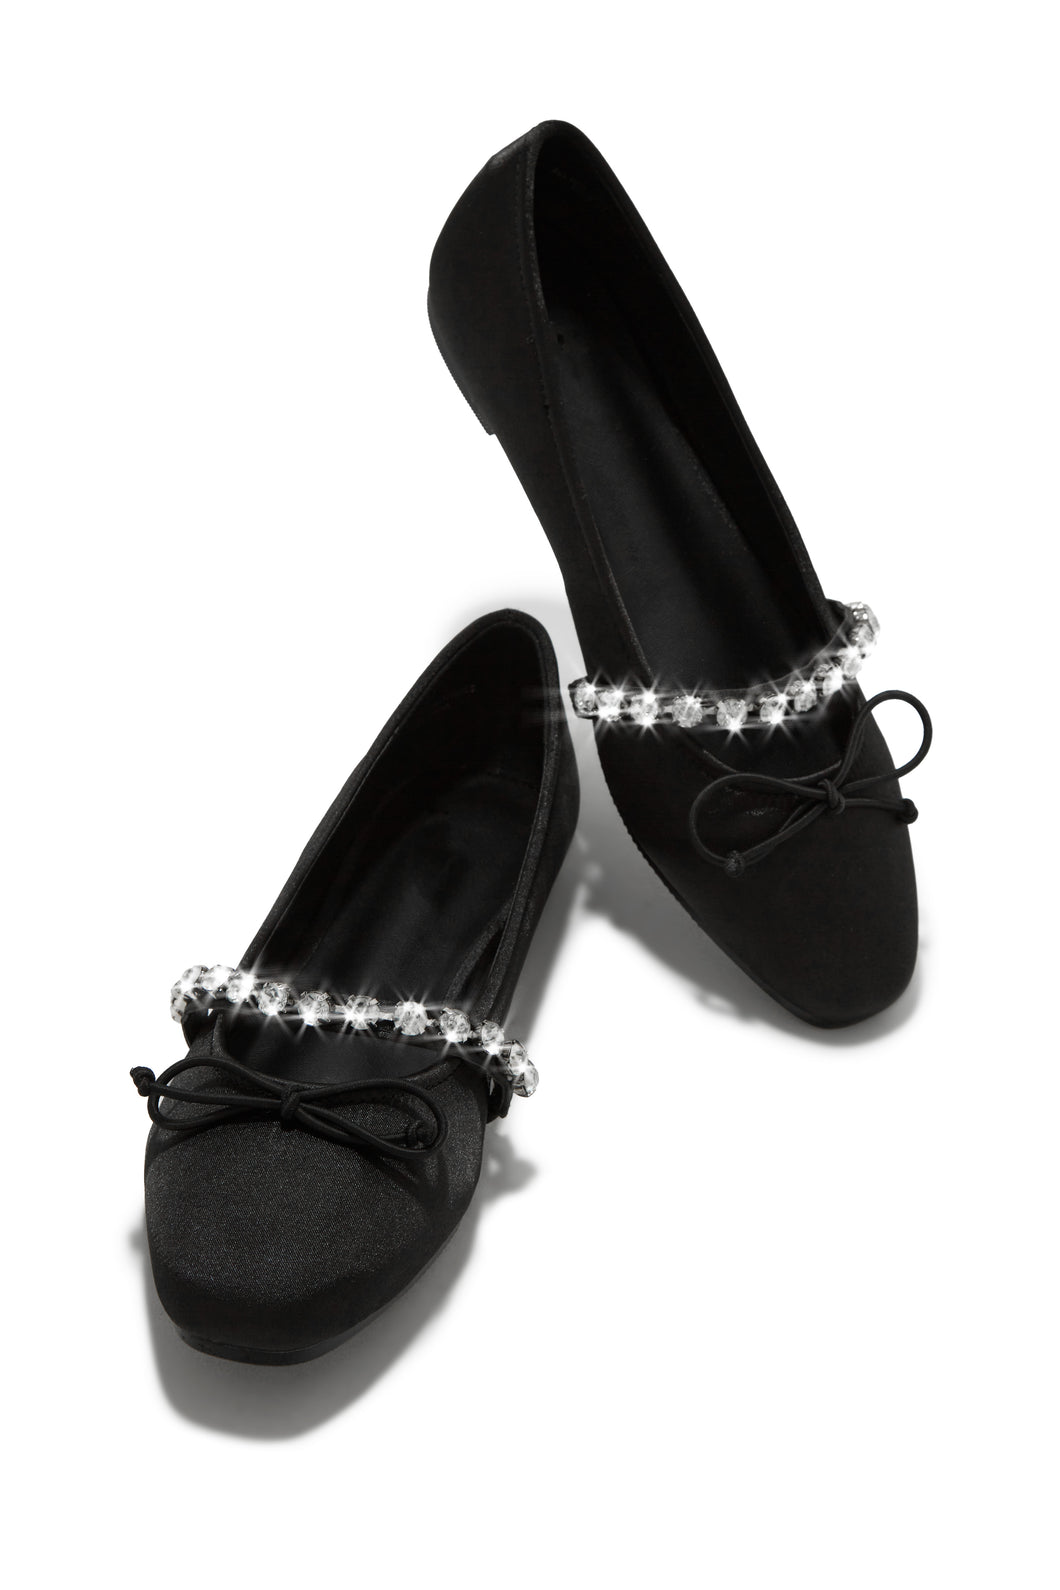 Black Flats with Silver embellishments